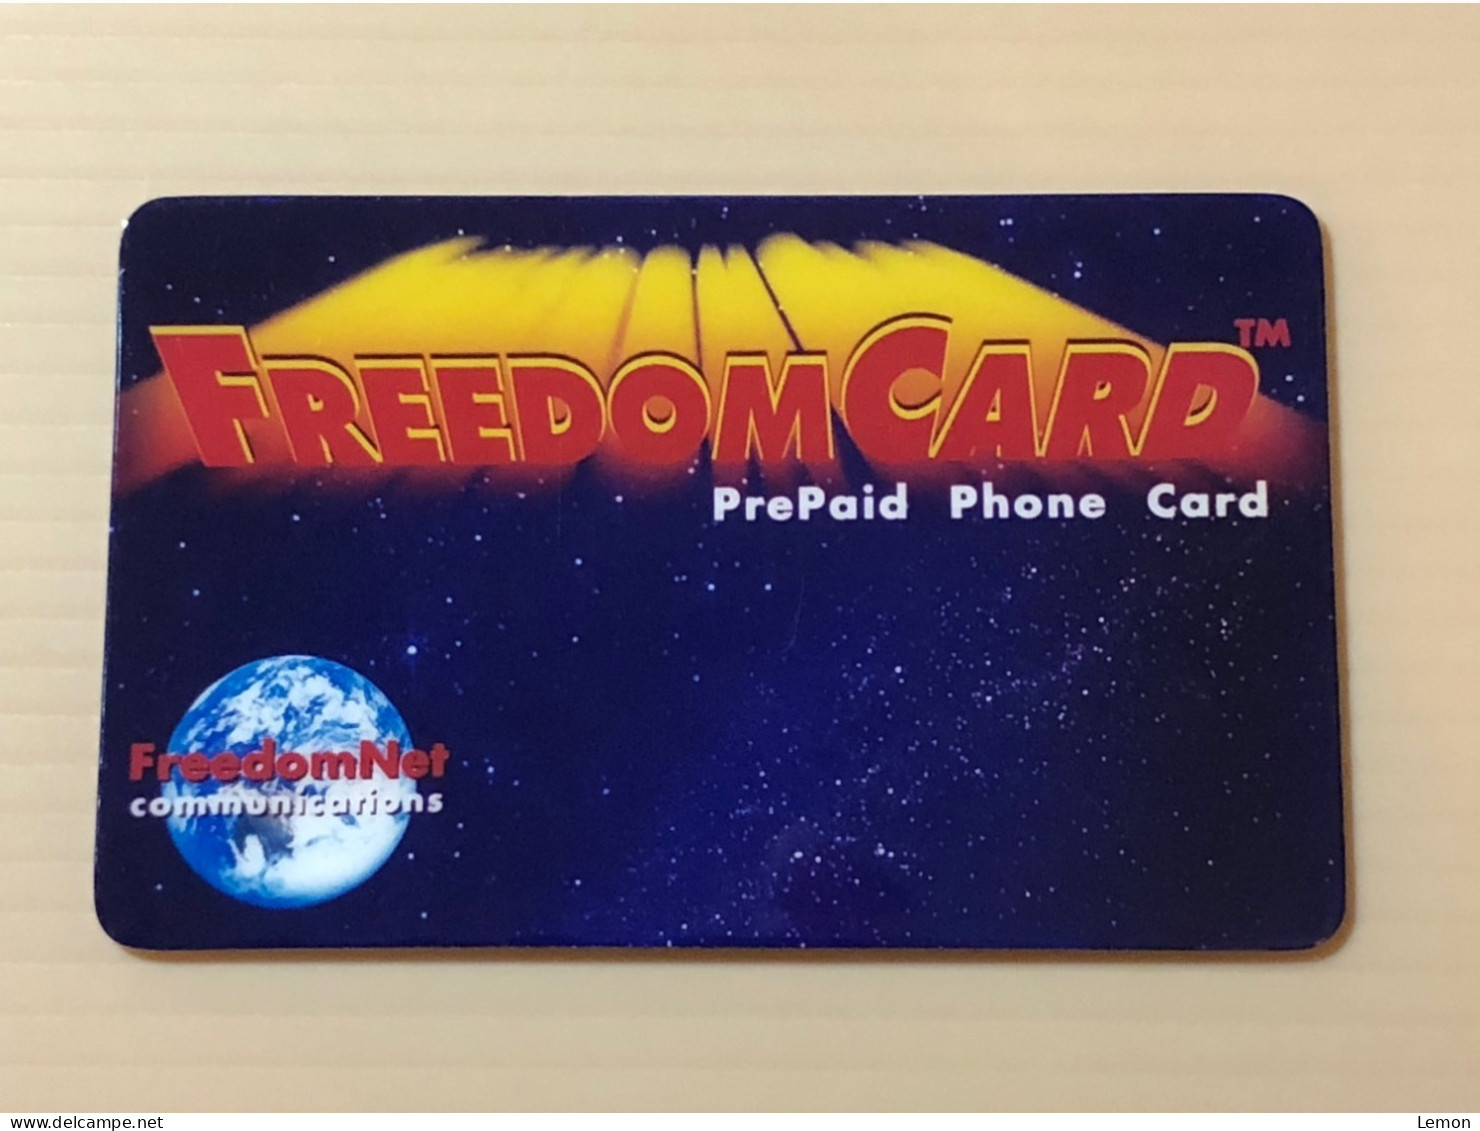 Mint USA UNITED STATES America Prepaid Telecard Phonecard, FREEDOM CARD SAMPLE CARD, Set Of 1 Mint Card - Collections